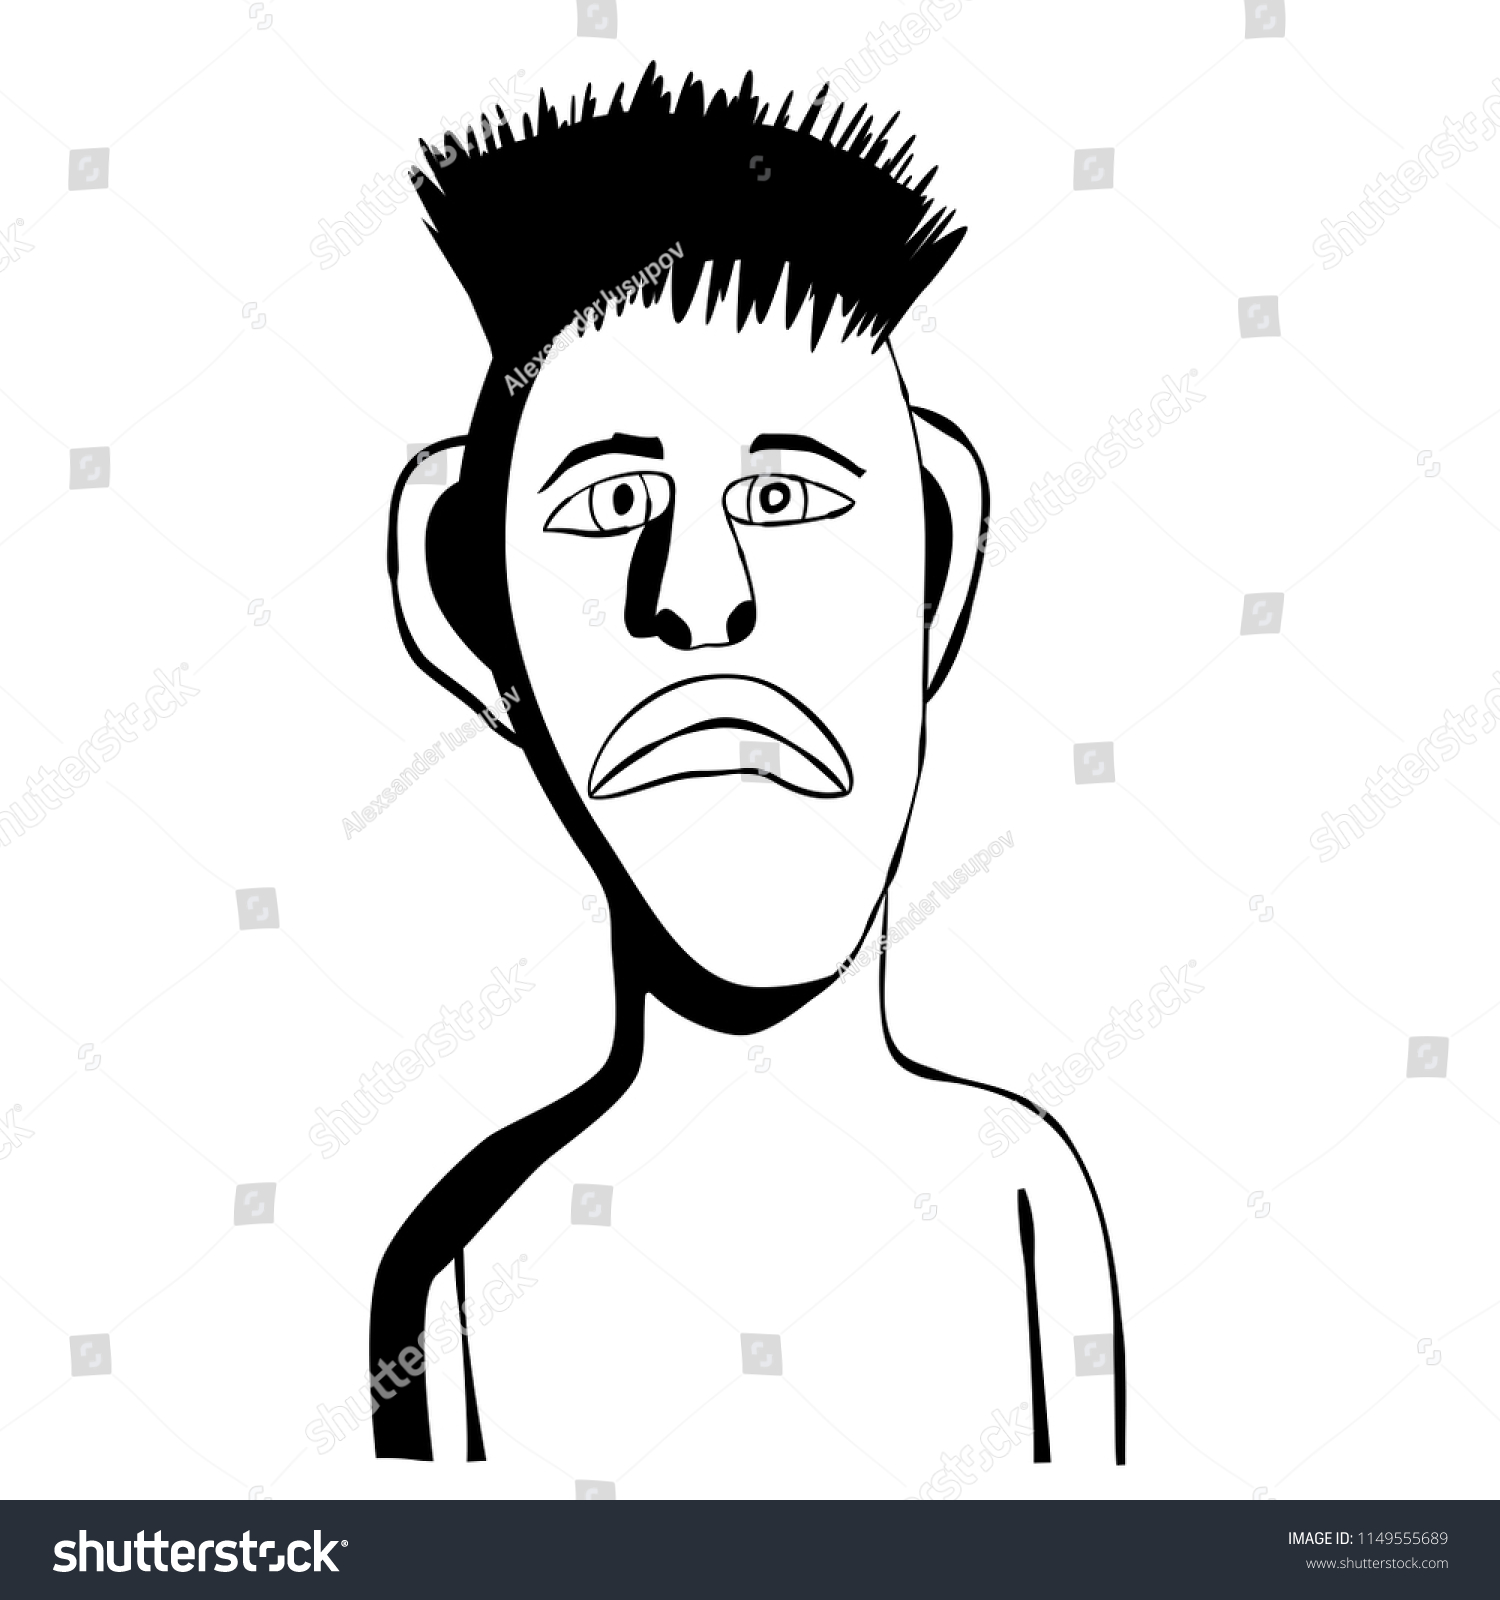 Sketched Illustration Surreal Funny Portrait Stock Vector (Royalty Free ...